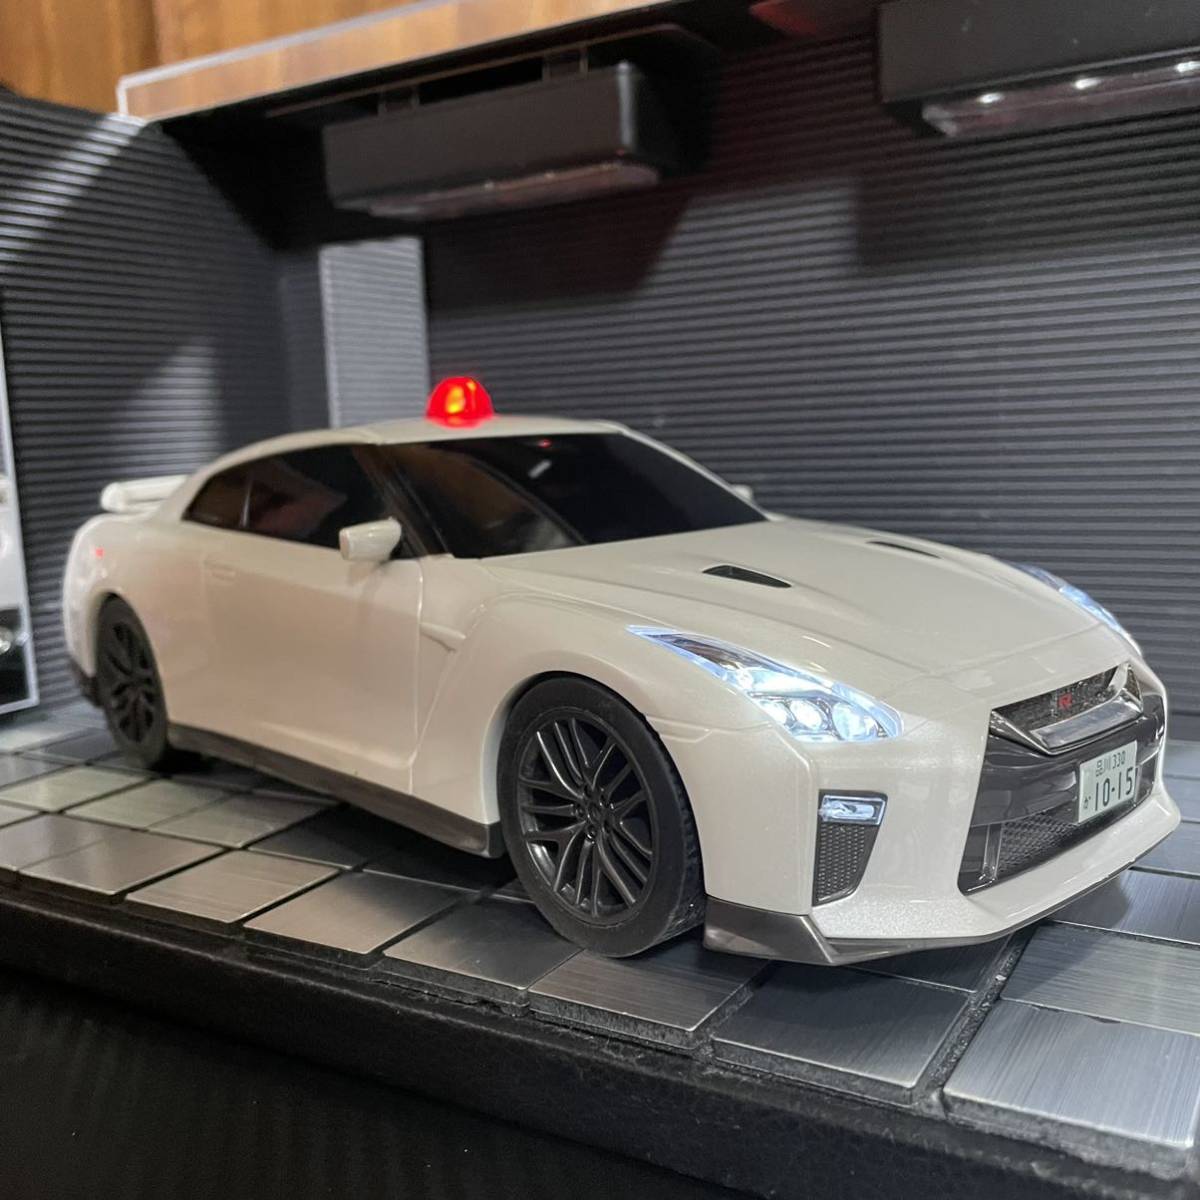 TOYCO 1/18 日産GT-R R35 覆面パトカー